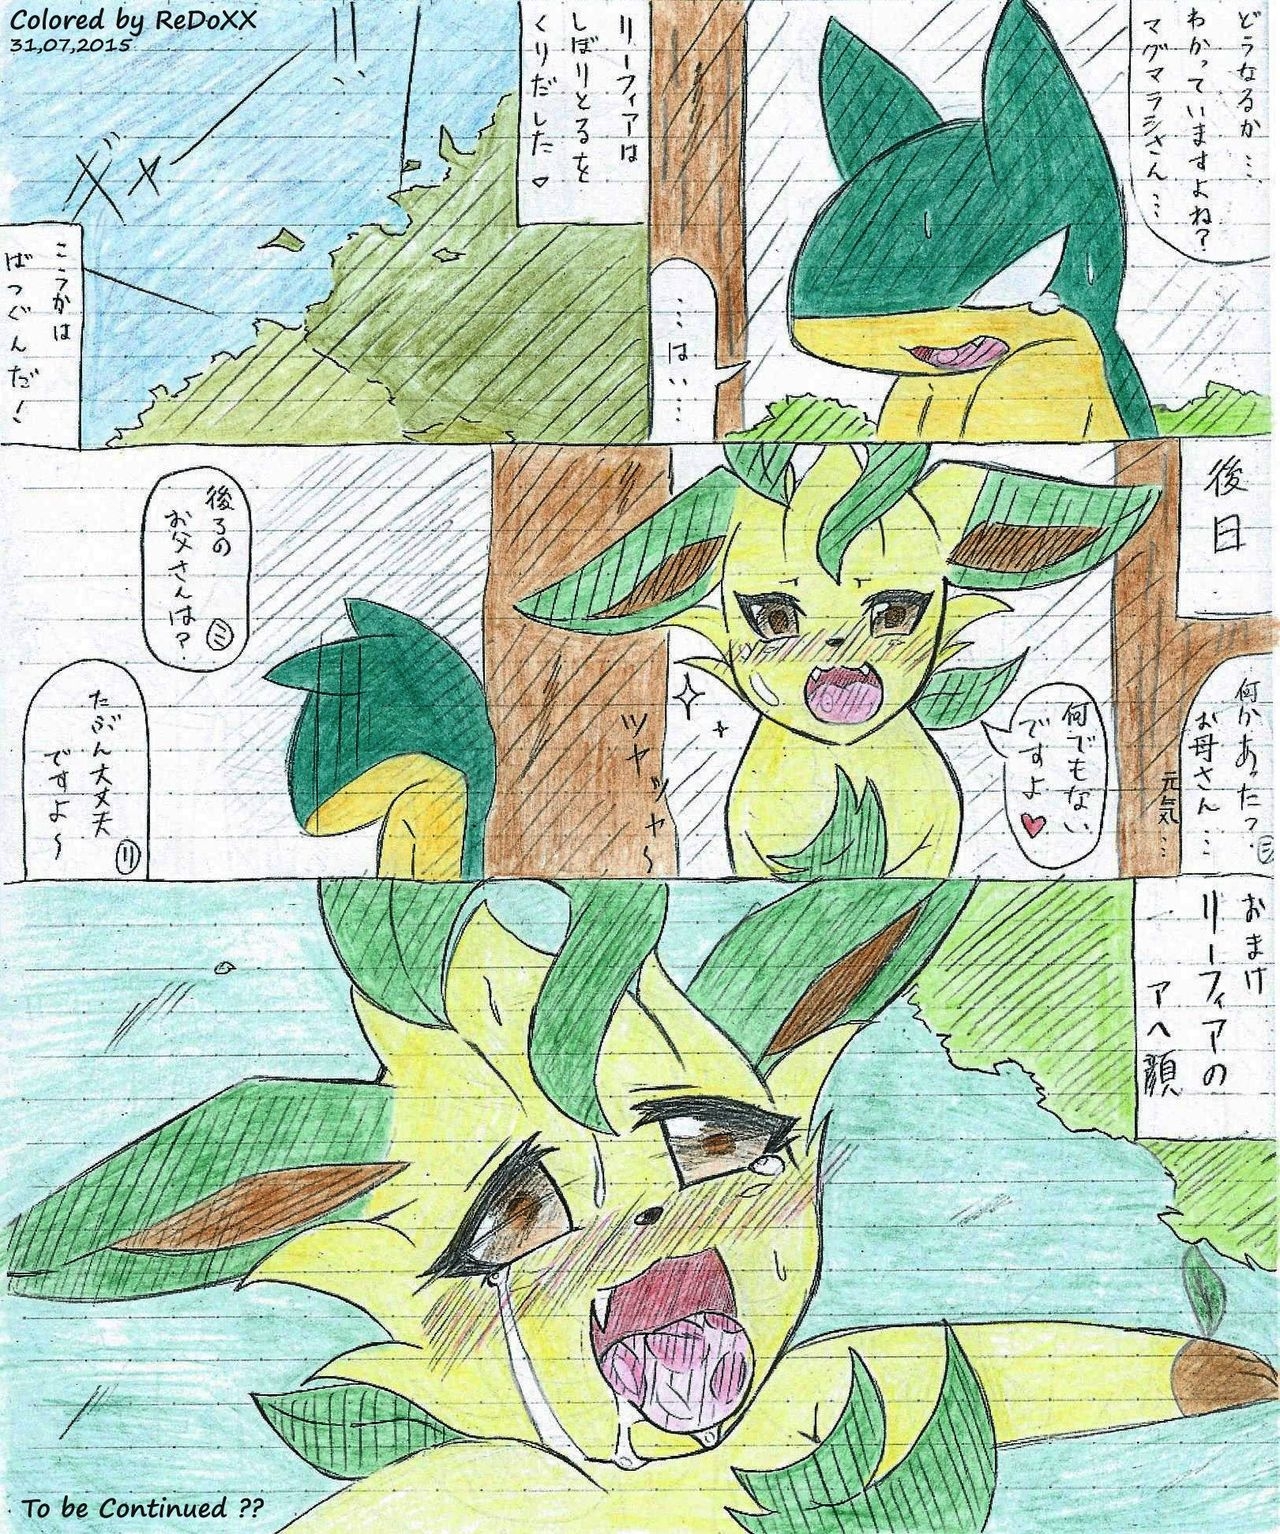 Leafeon X Quilava [Colorized by ReDoXX] 64